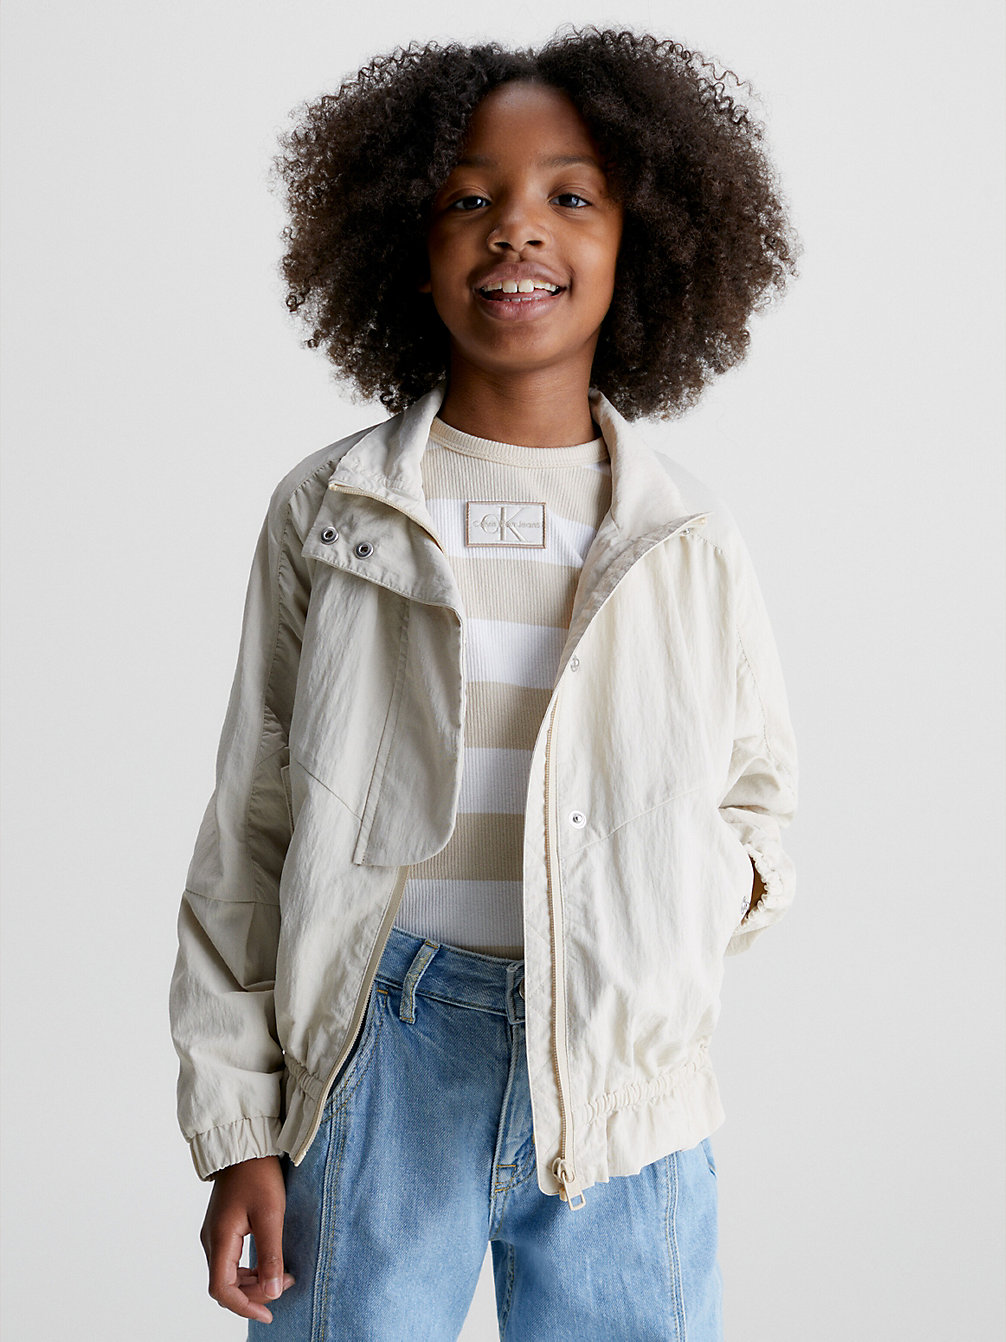 CLASSIC BEIGE Relaxed Recycled Nylon Jacket undefined girls Calvin Klein